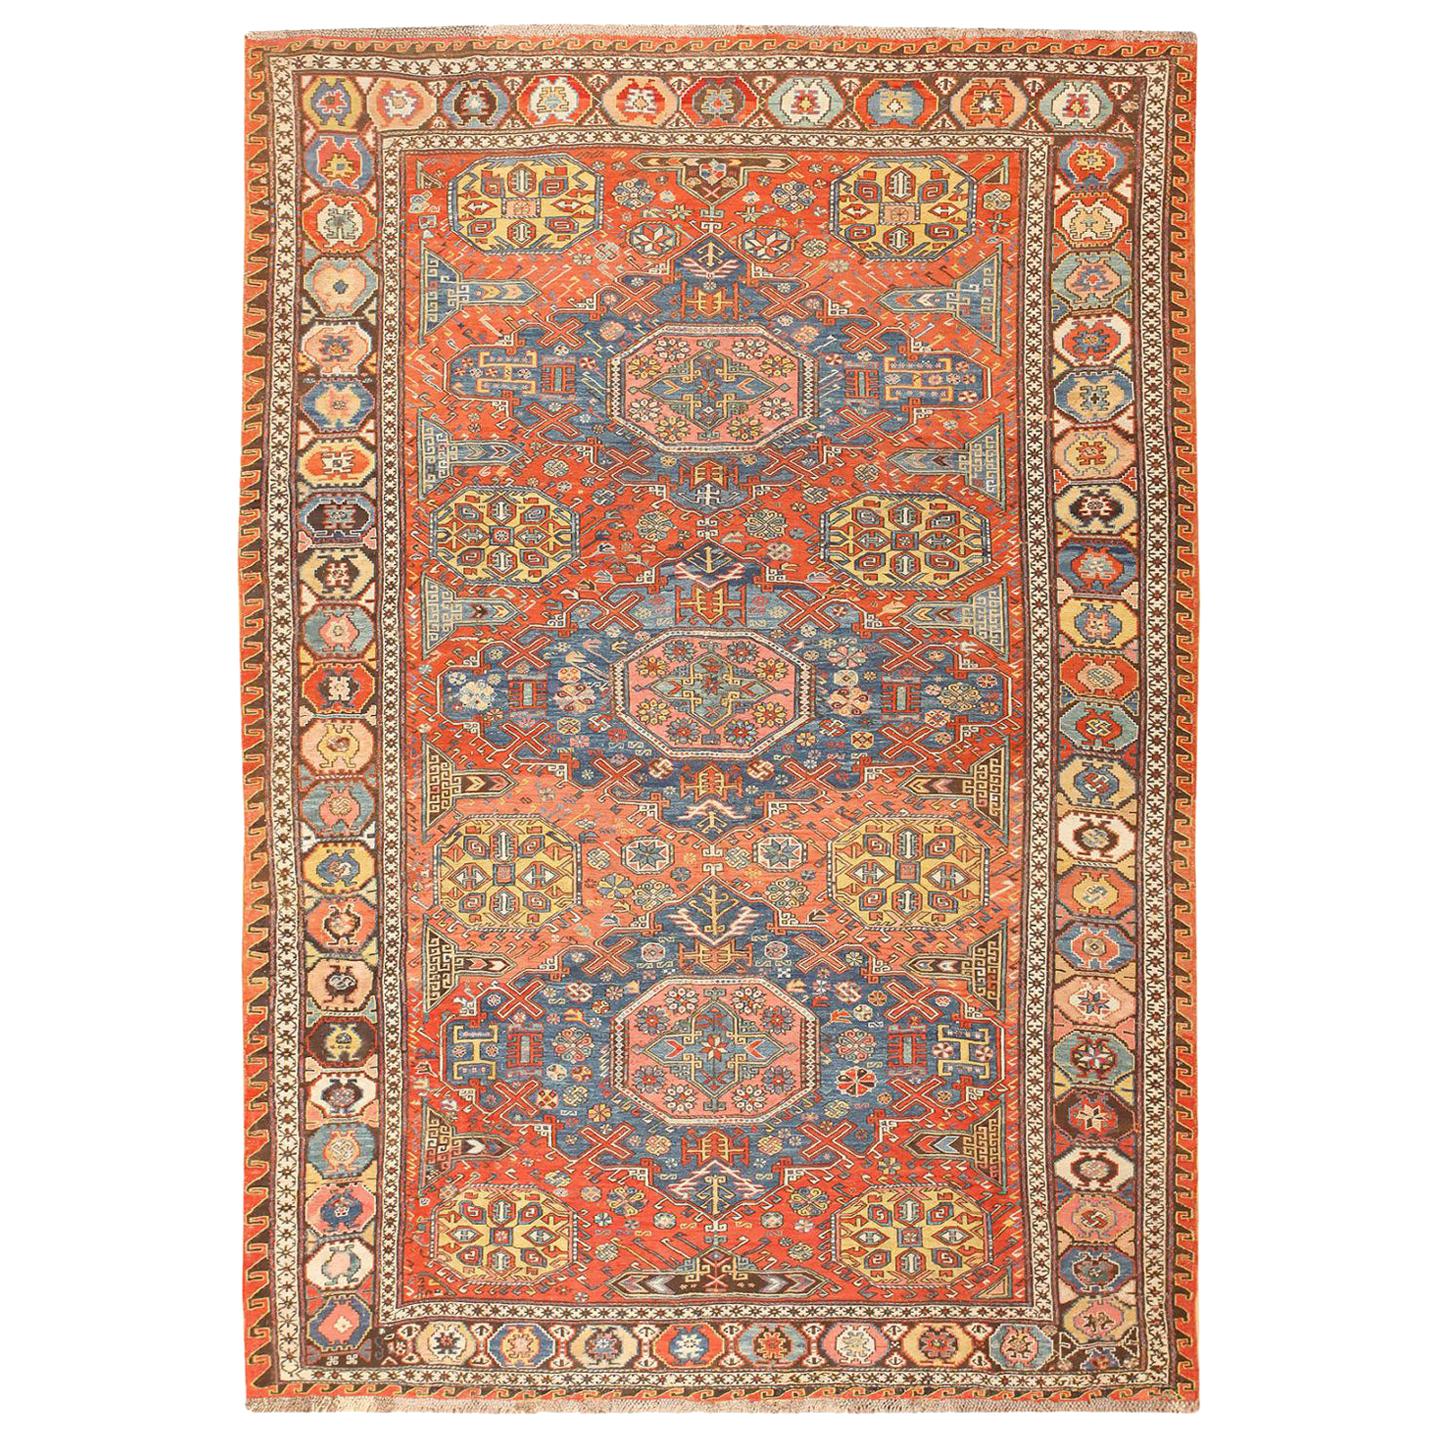 Nazmiyal Collection Antique Caucasian Soumak Rug. 6 ft 9 in x 9 ft 6 in